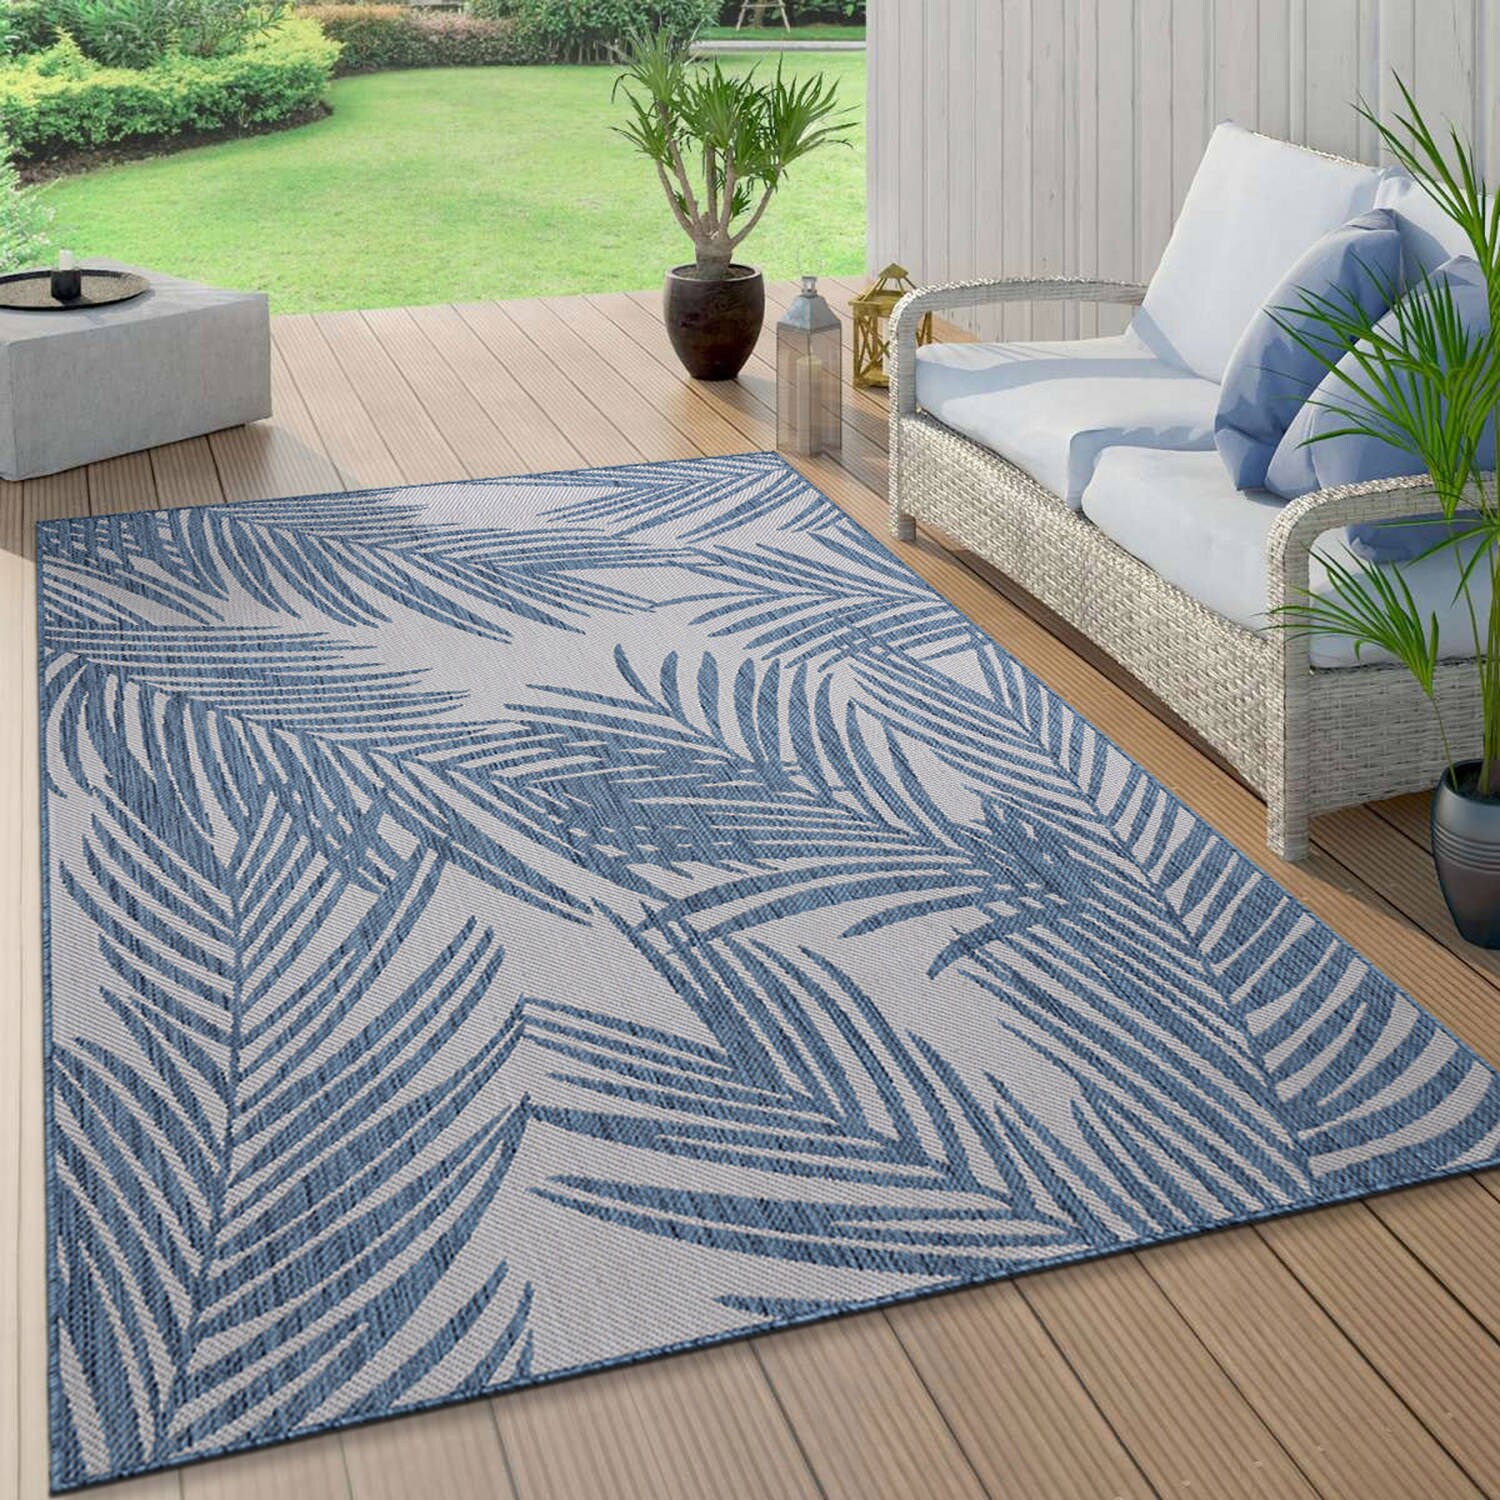 World Rug Gallery Floral Tropical Indoor/Outdoor Area Rug - Blue 5' x 7